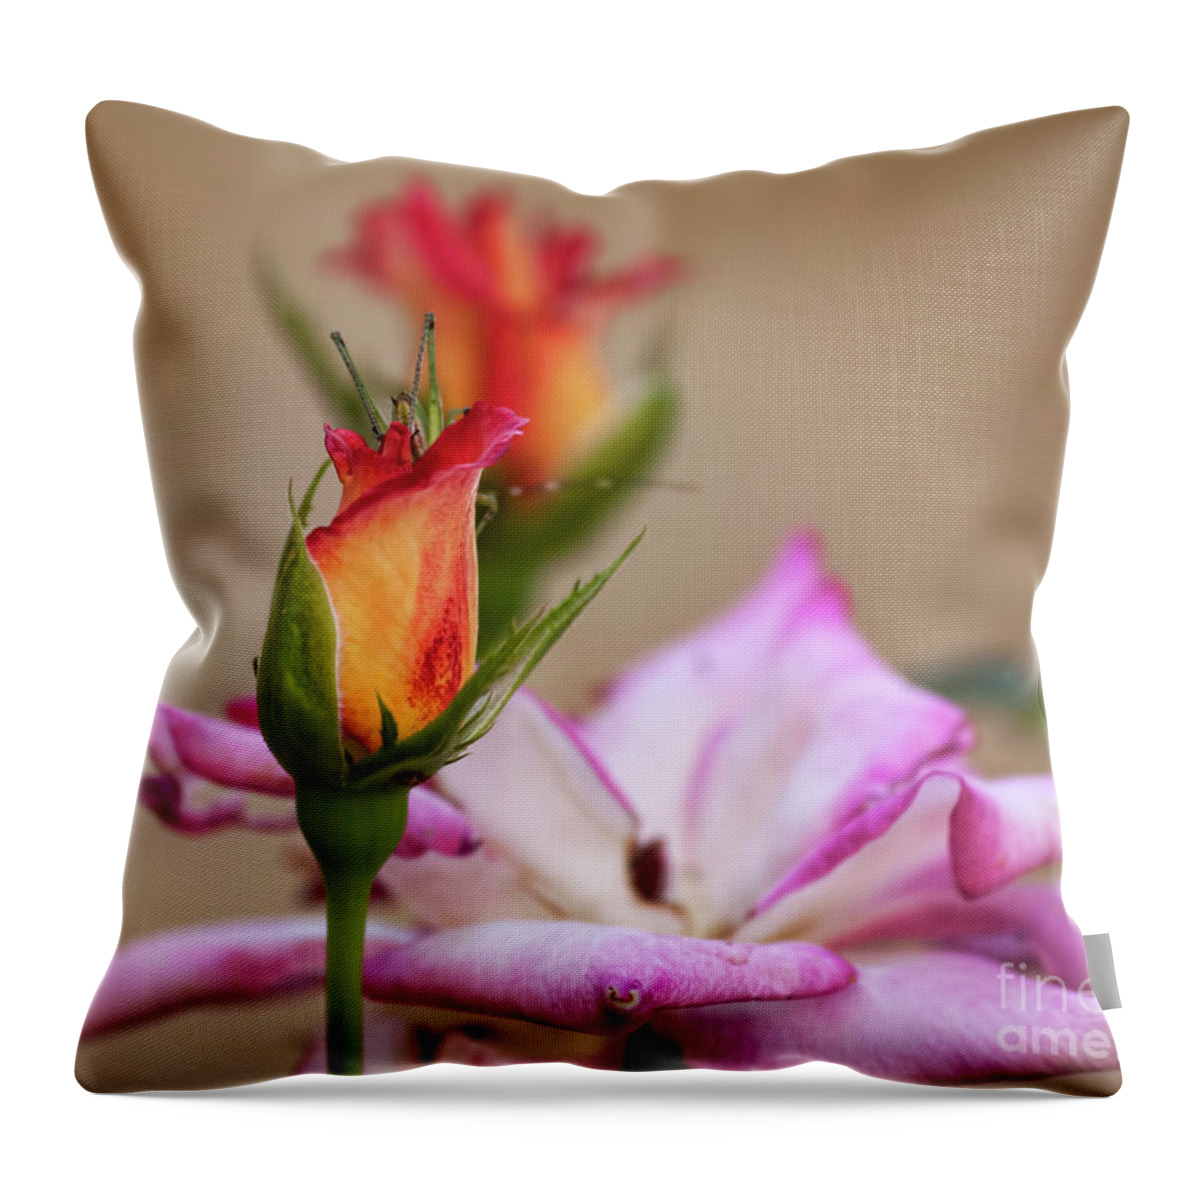 Roses Throw Pillow featuring the photograph We Have Company by Joan Bertucci